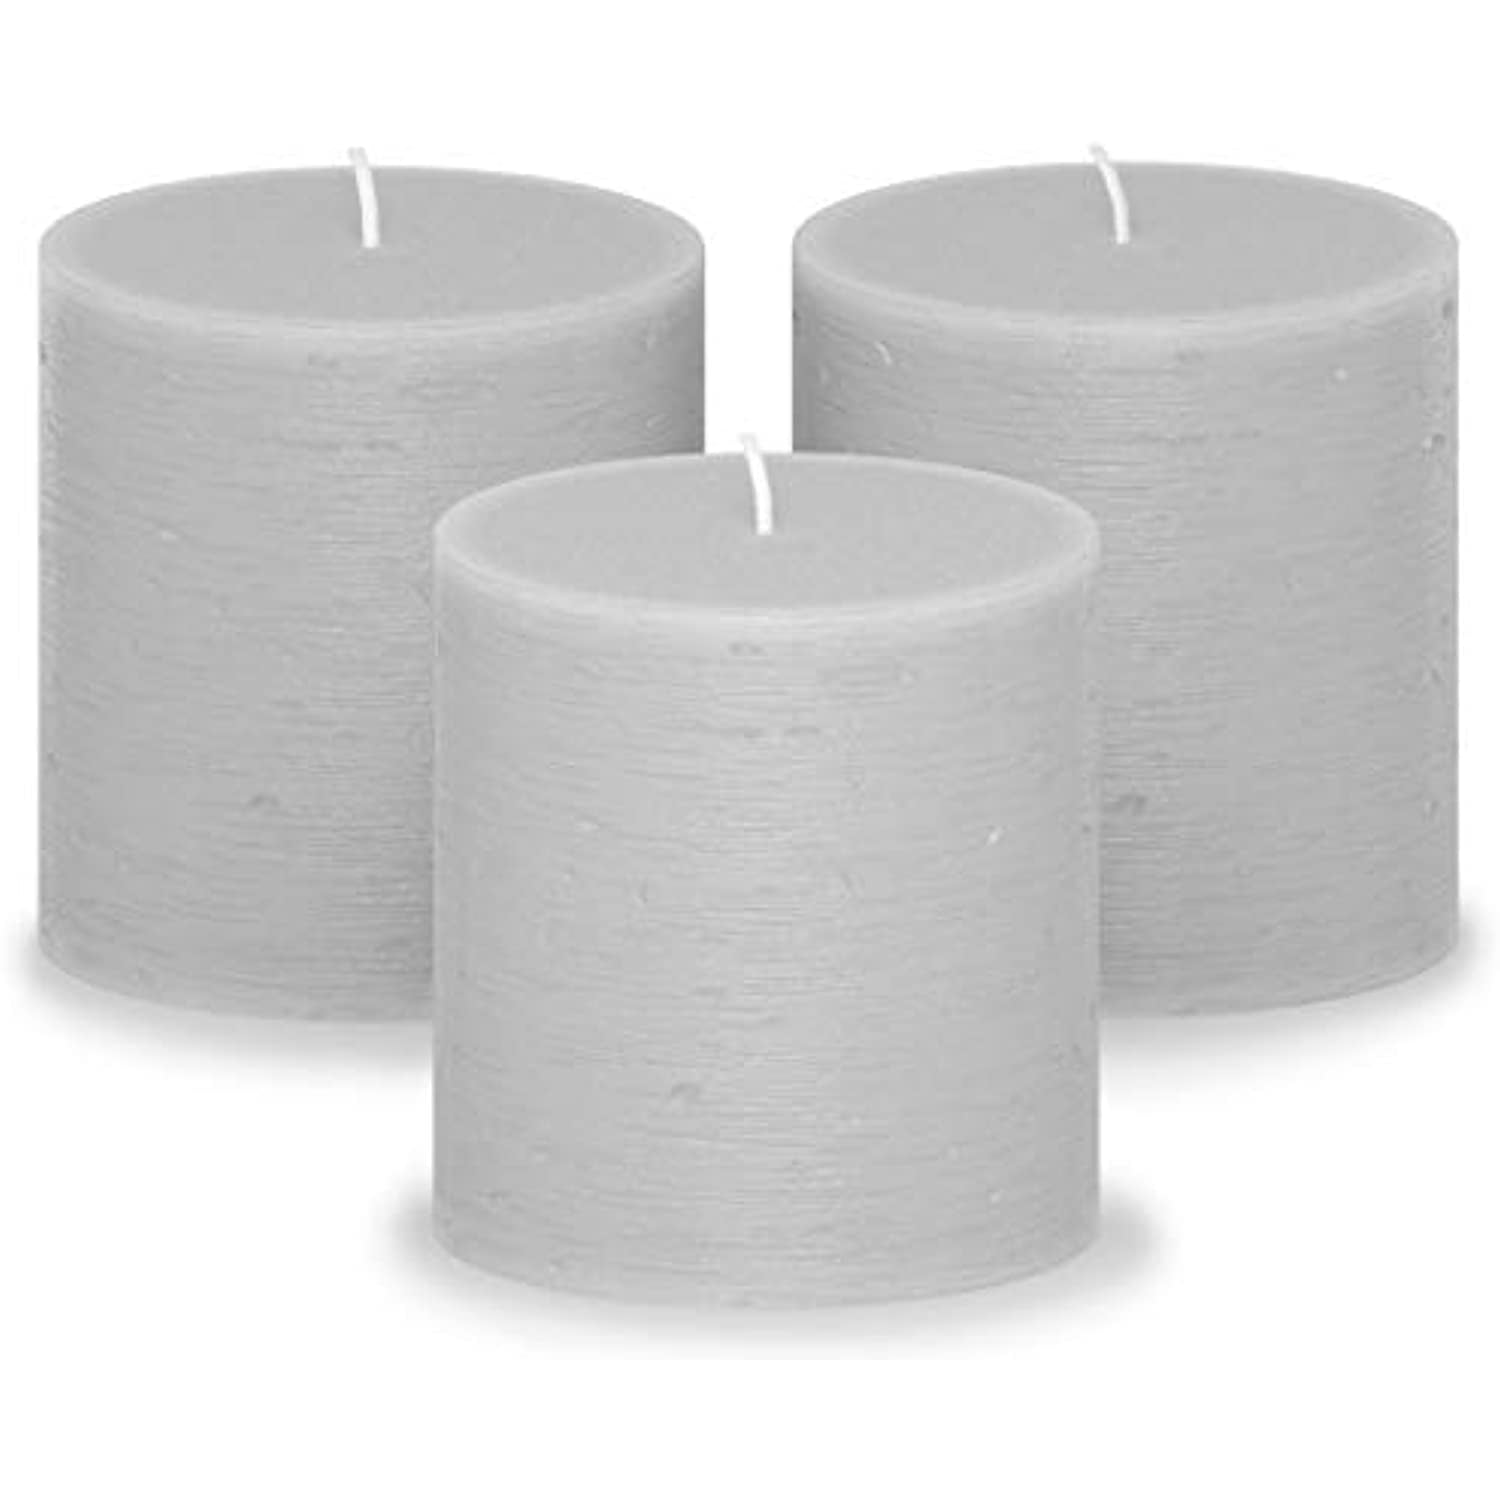 Set of 3 Grey Pillar Candles 3" x 3" Gray Unscented Rustic for Weddings Home 